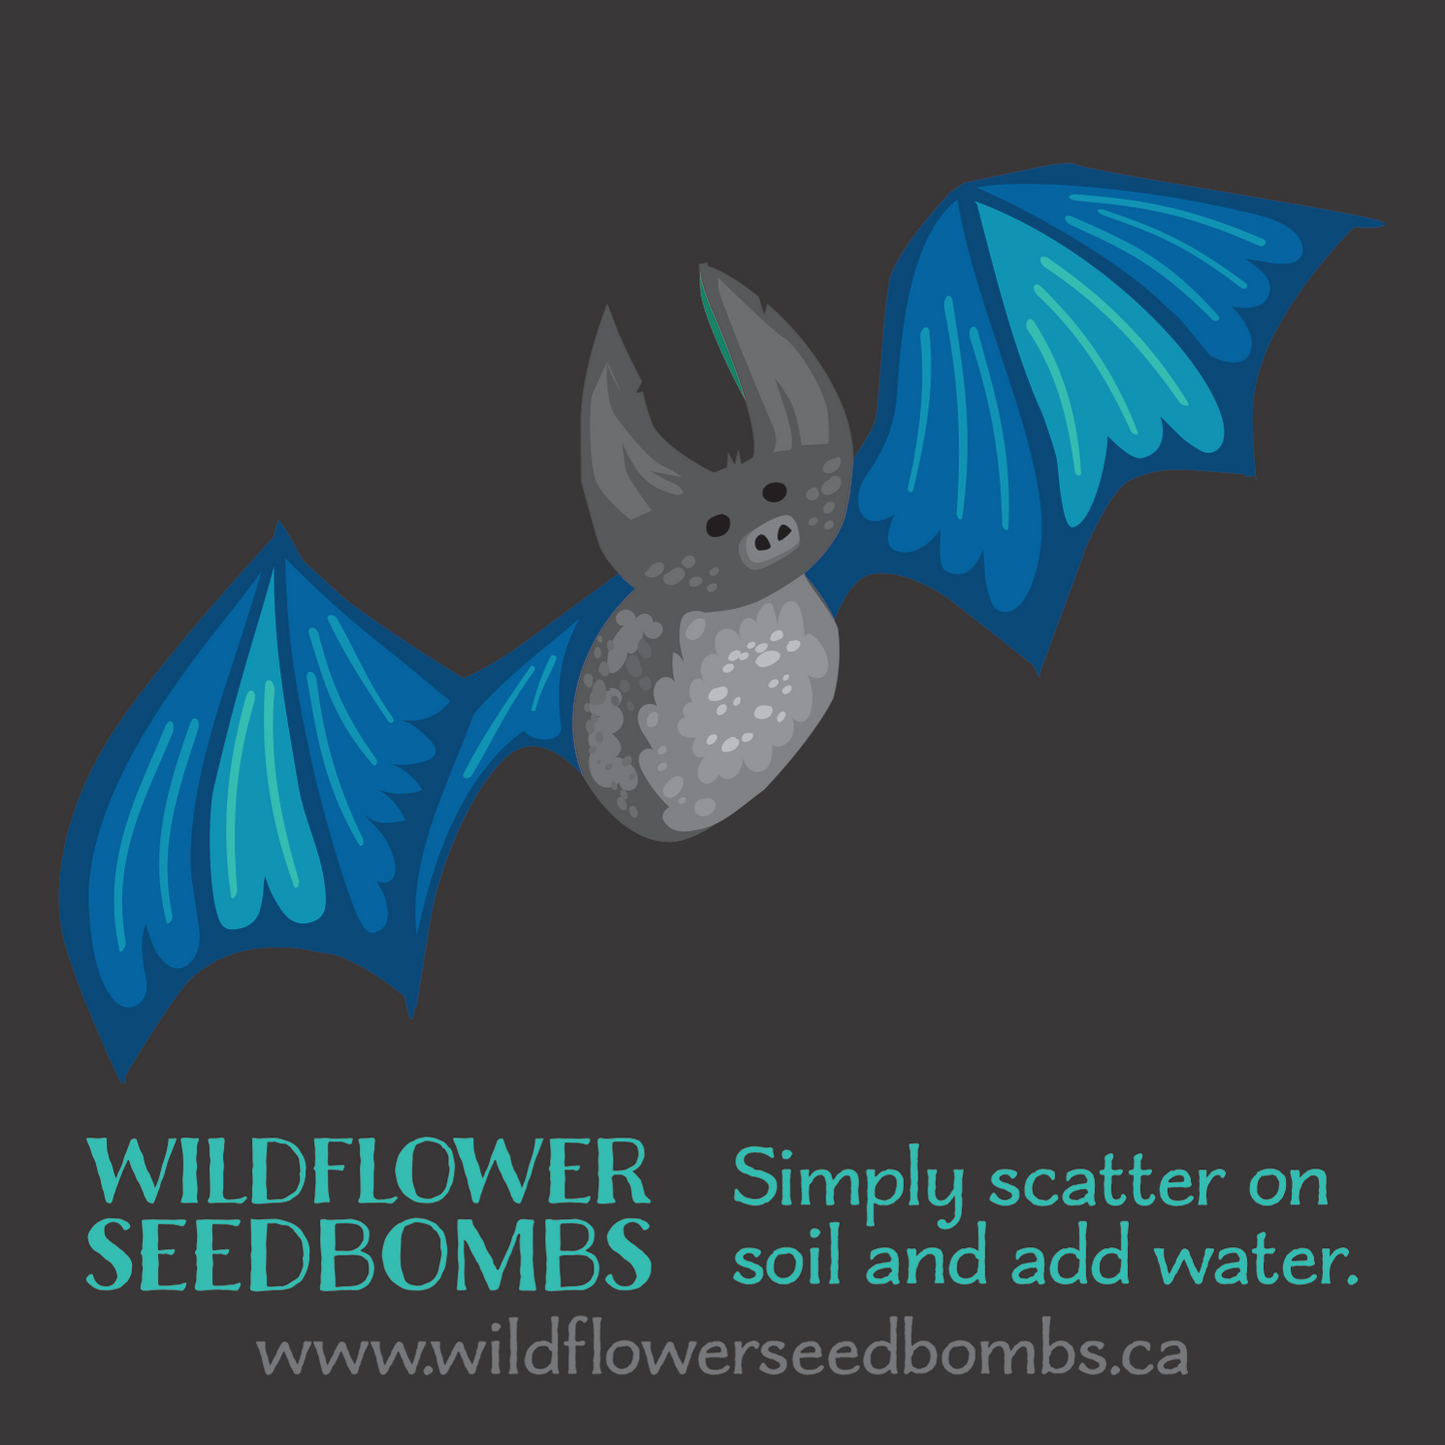 Illustration of a bat with blue wings on a charcoal grey background. Text in blue below: WILDFLOWER SEEDBOMBS Simply scatter on soil and add water. Text in grey at the bottom: www.wildflowerseedbombs.ca